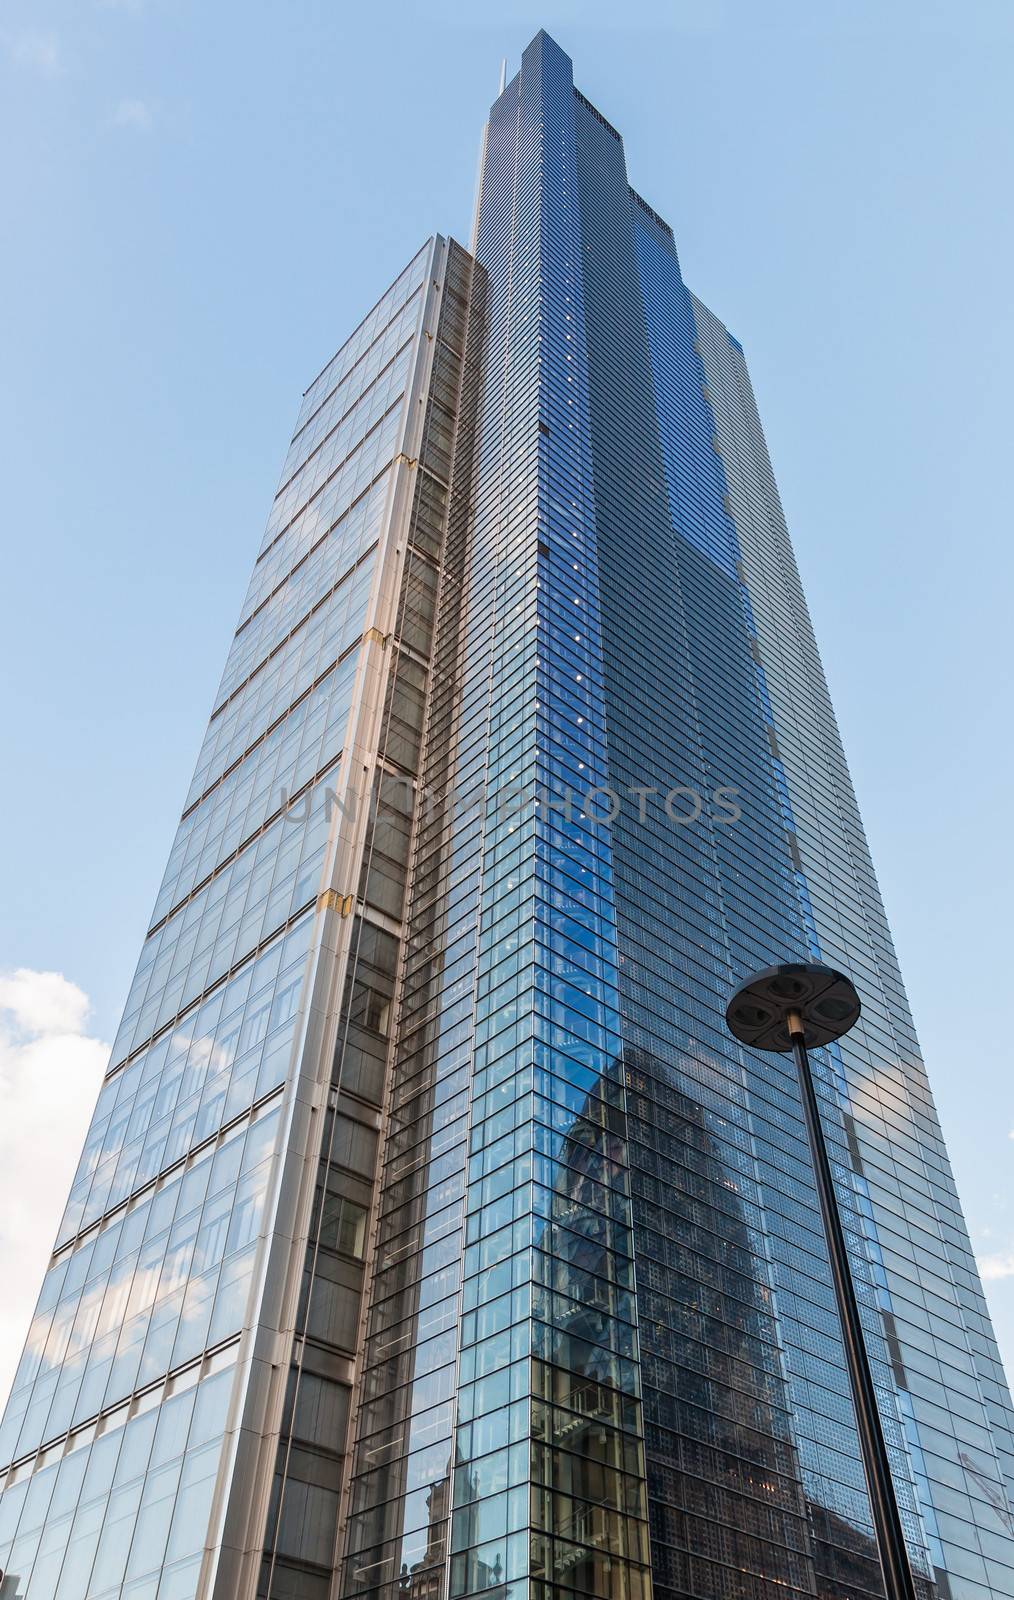 Skyscraper in the City of London by mkos83